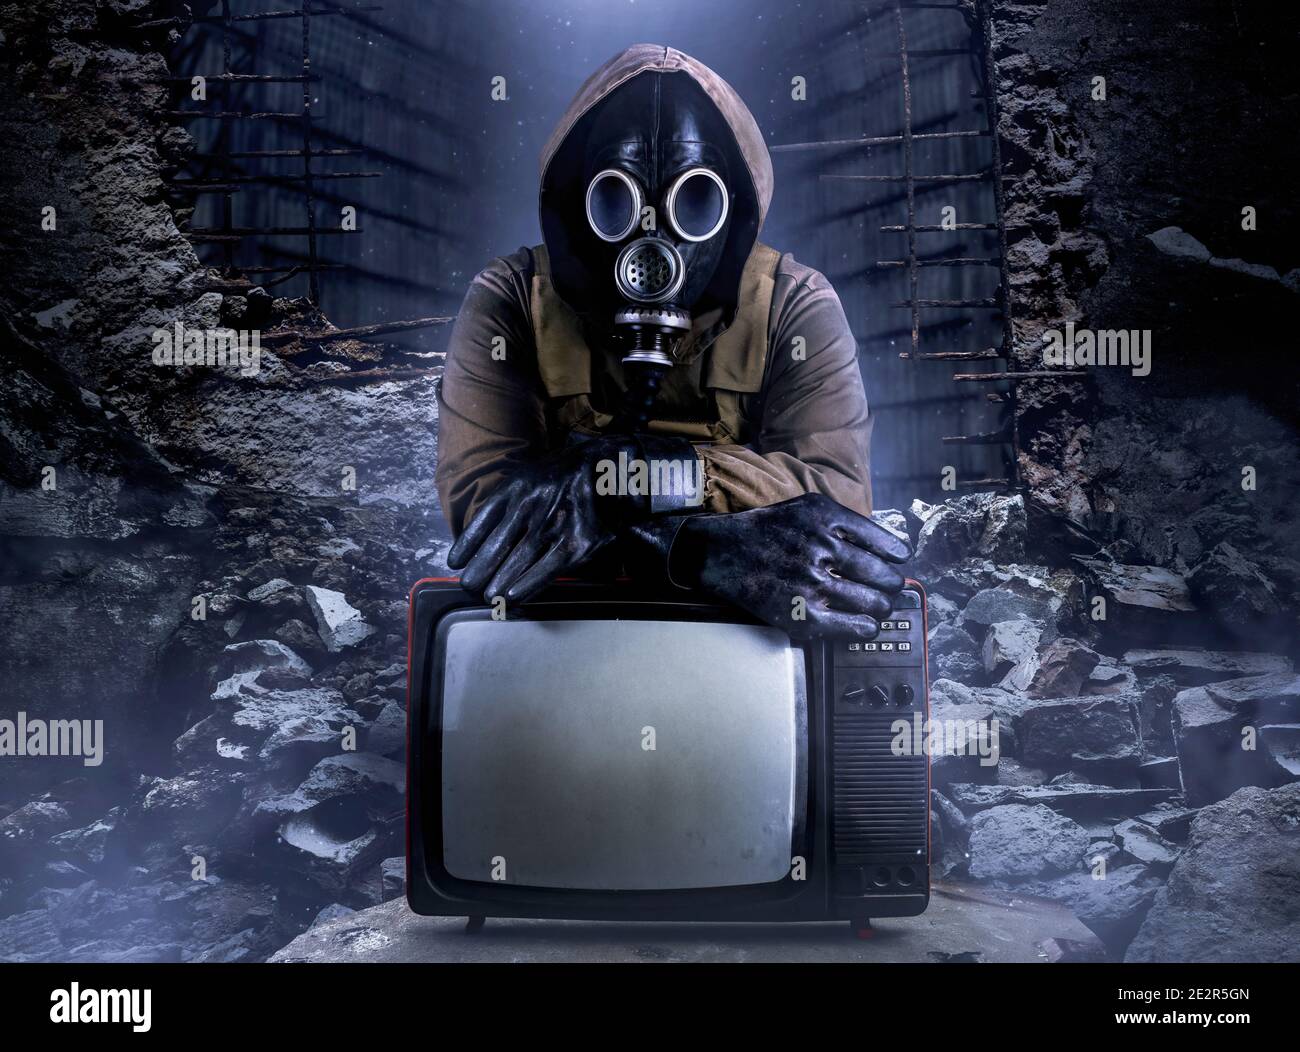 Photo of stalker soldier in jacket and armored vest and rubber gloves standing with old tv set on ruined dark background. Stock Photo